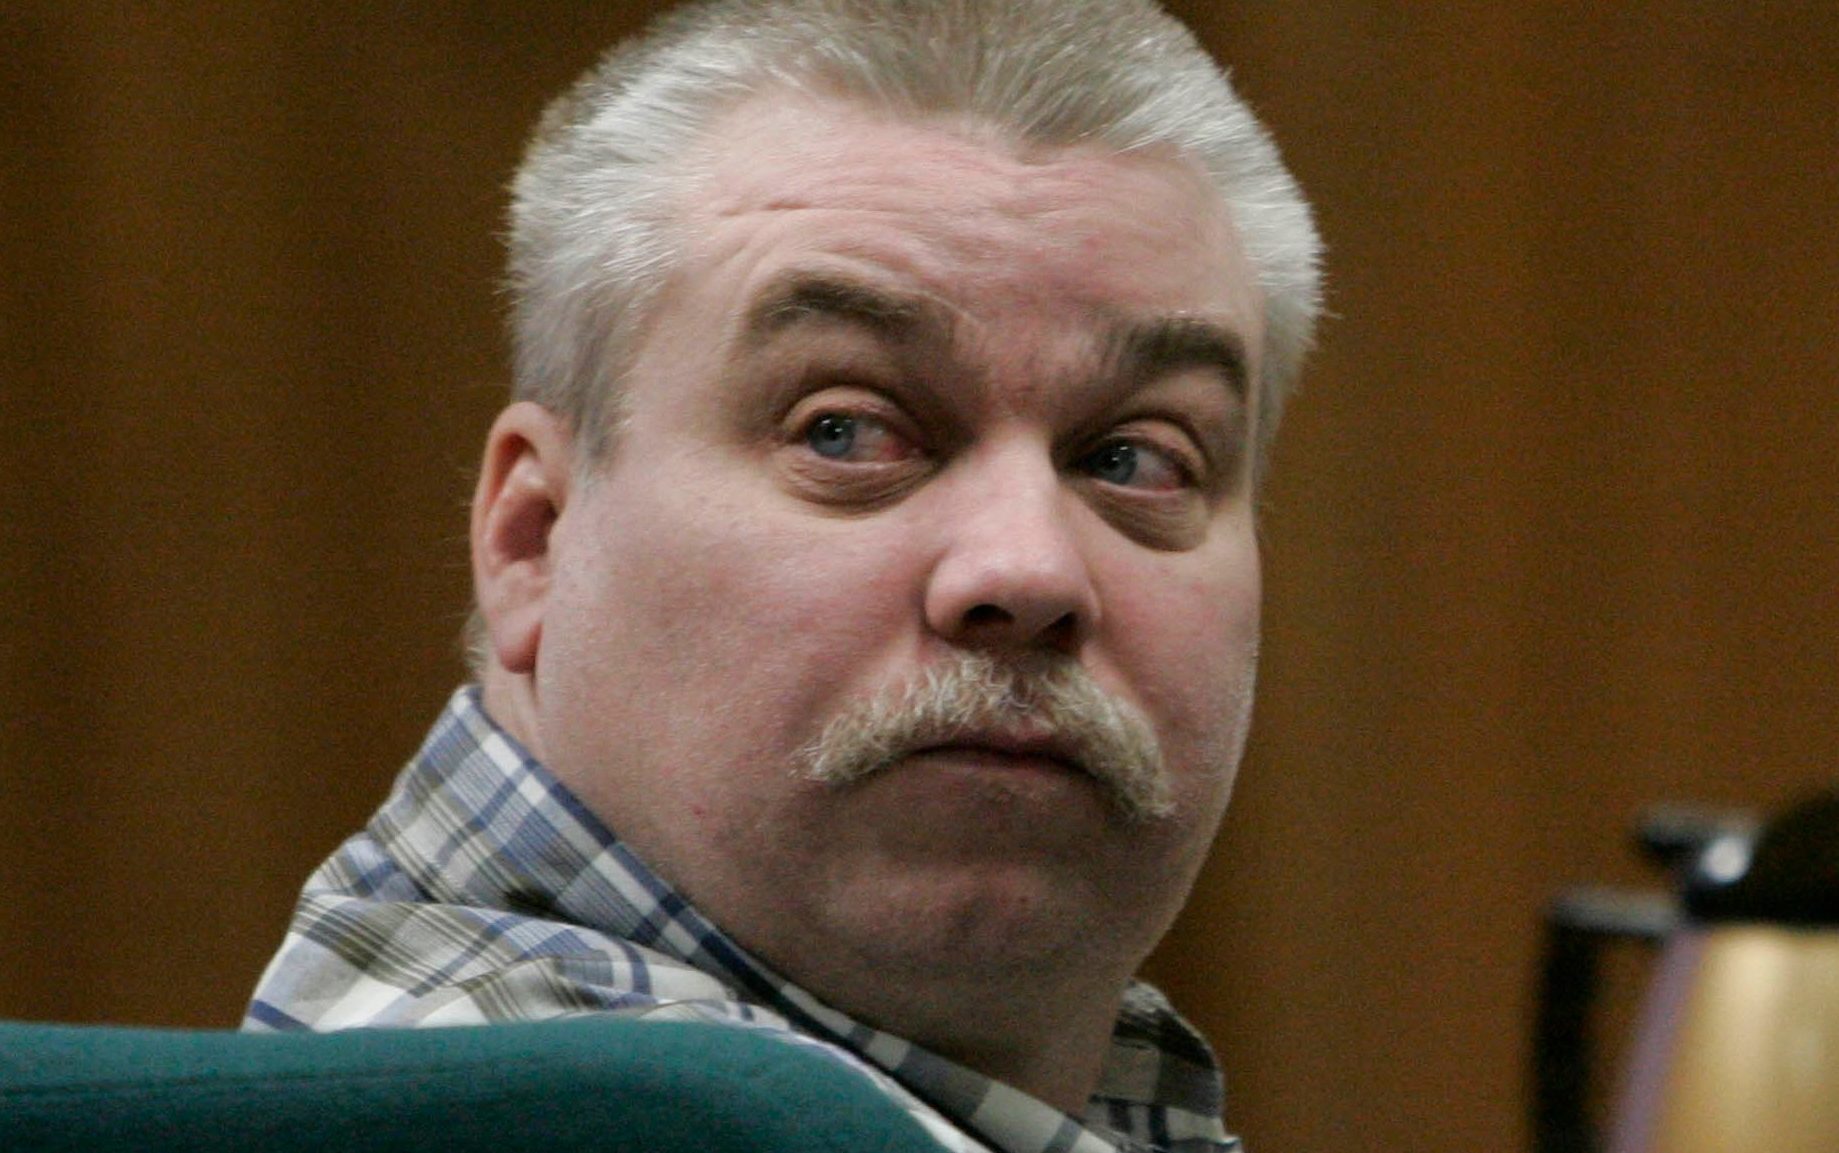 Steven Avery’s case featured in Netflix’s Making A Murderer - True crime shows have become staples of the entertainment industry